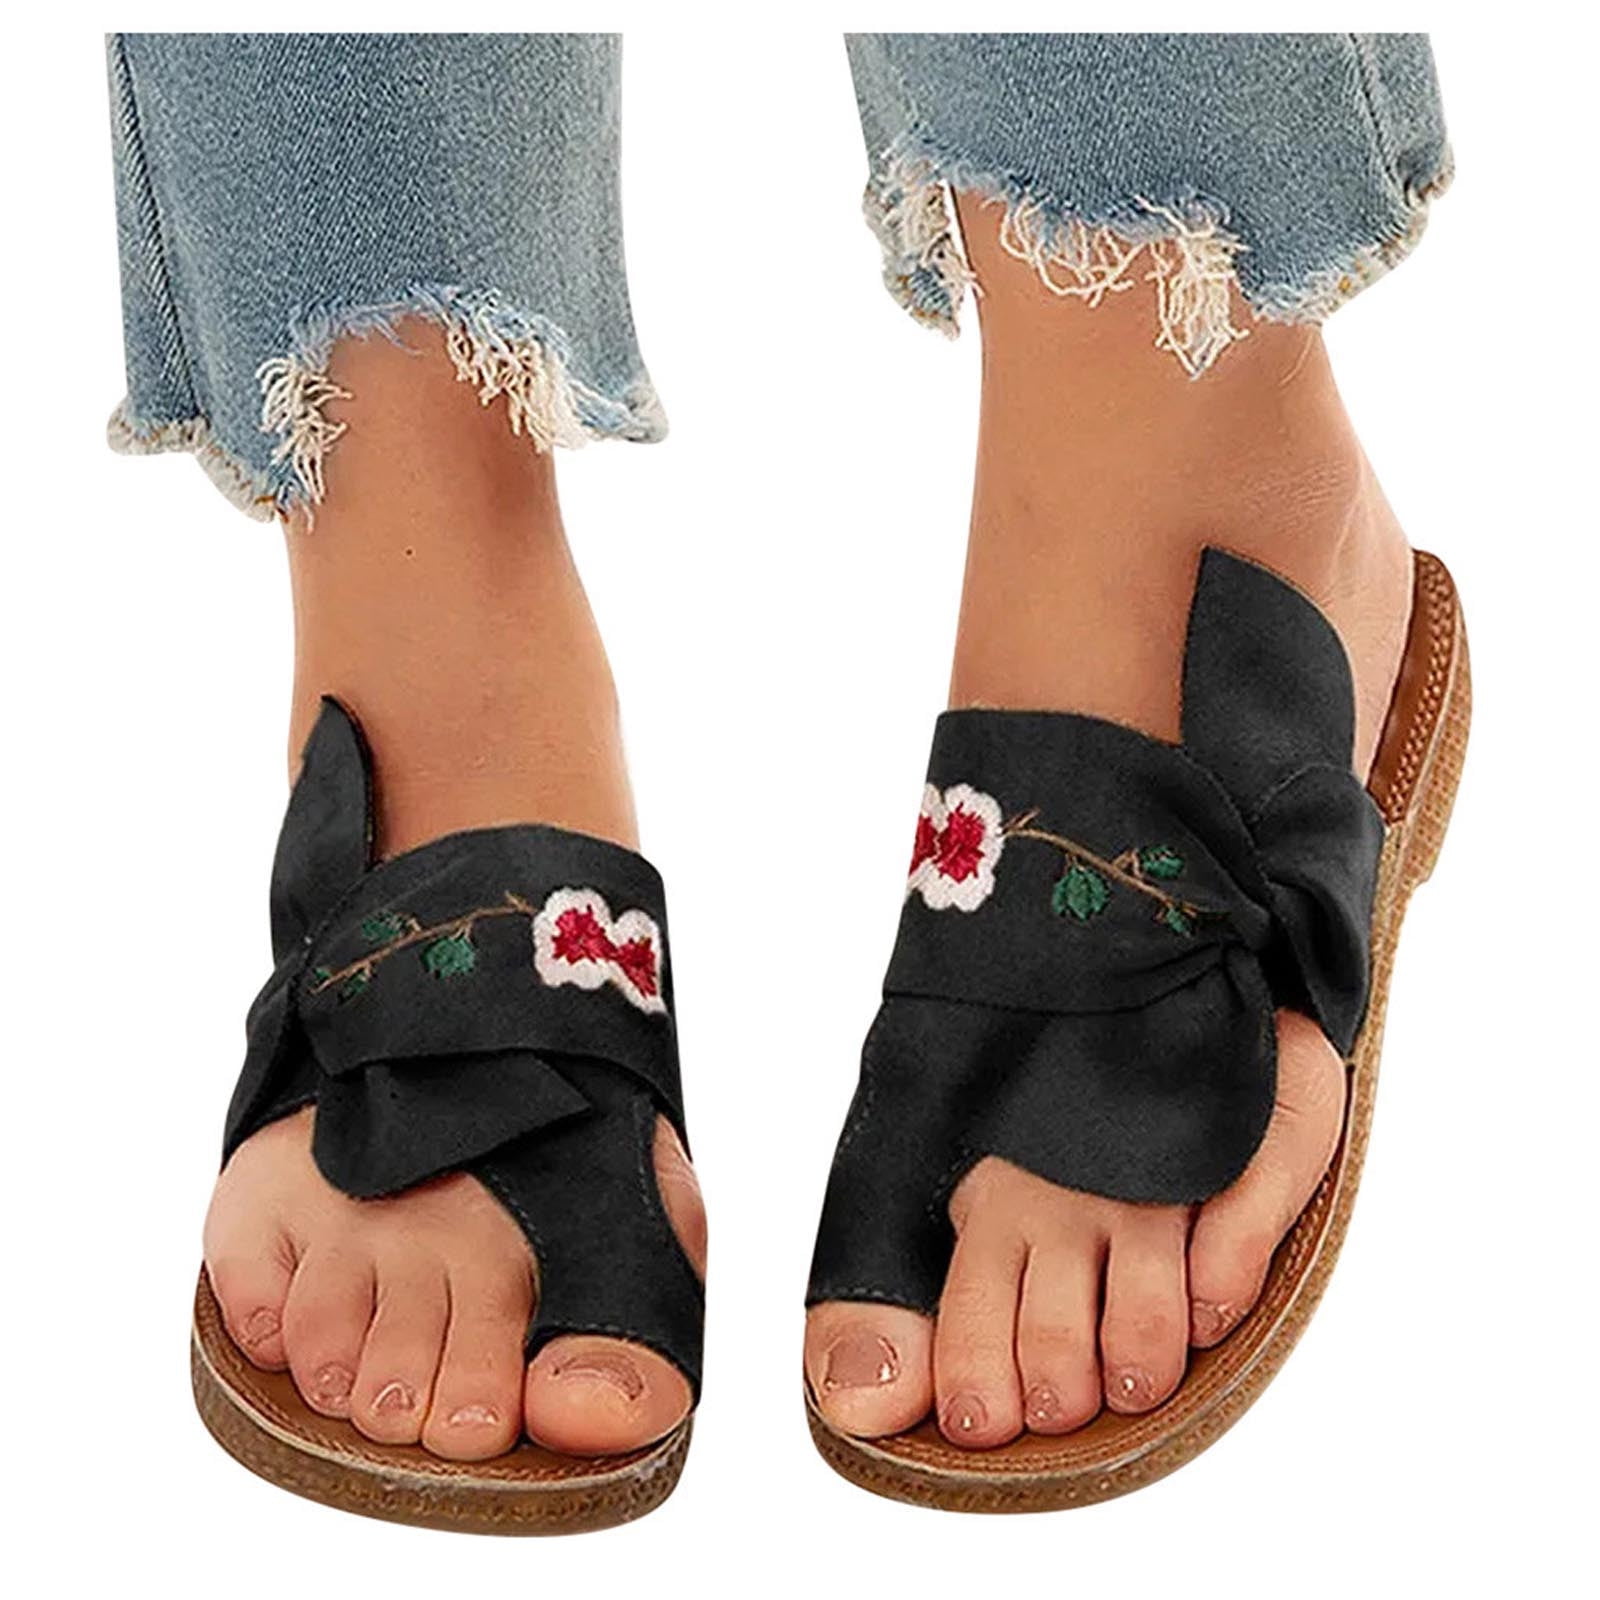 Women Flip Flop Slippers Casual Summer Comfy Orthopedic Shoes Ladies Ring Open Toe Non-Slip Slides Flat Sandals 